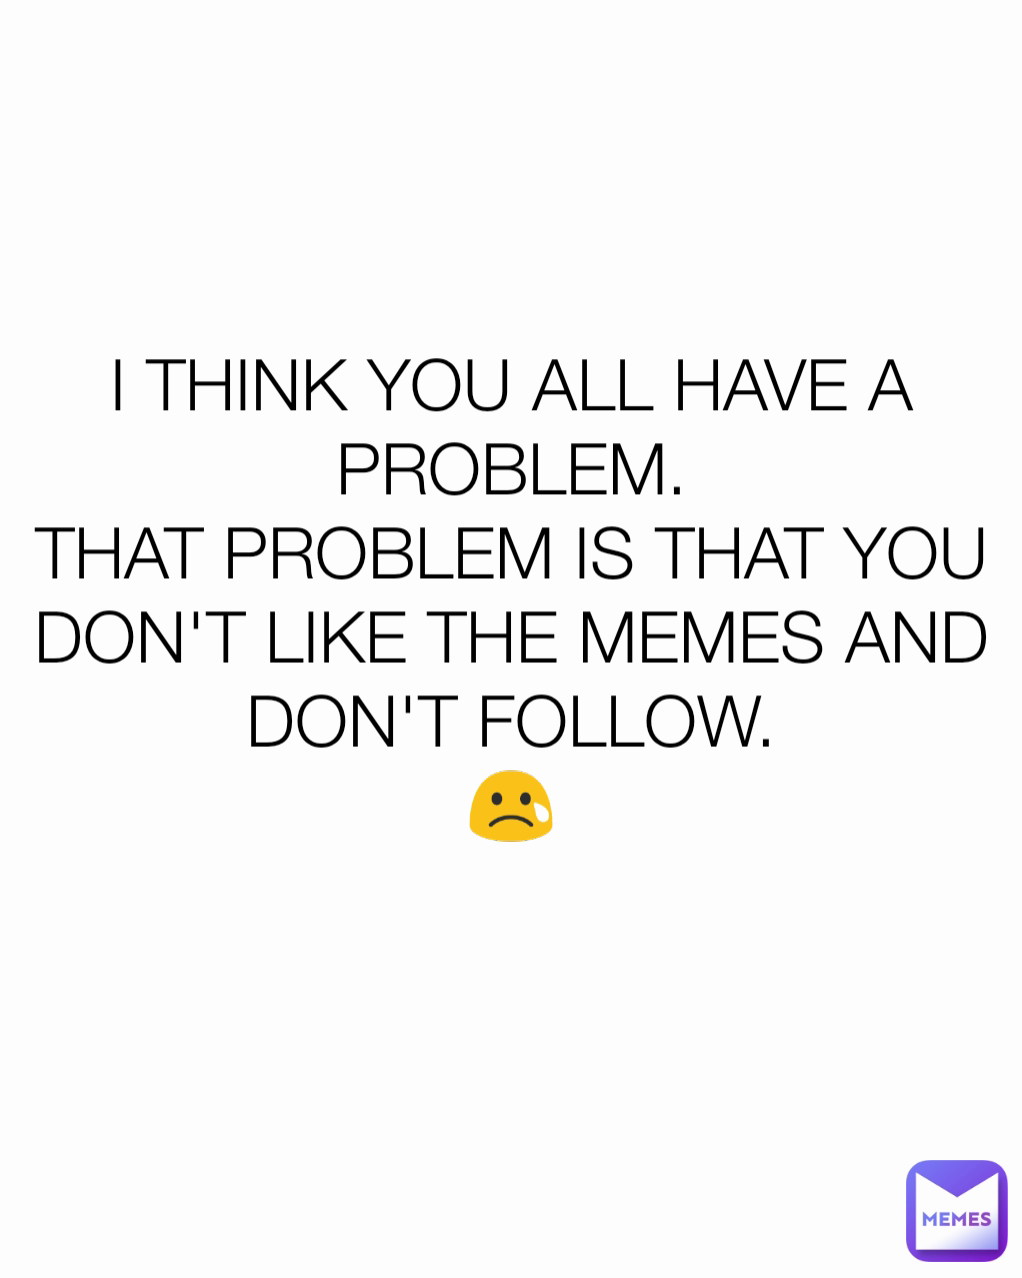 I THINK YOU ALL HAVE A PROBLEM.
THAT PROBLEM IS THAT YOU DON'T LIKE THE MEMES AND DON'T FOLLOW.
😢
